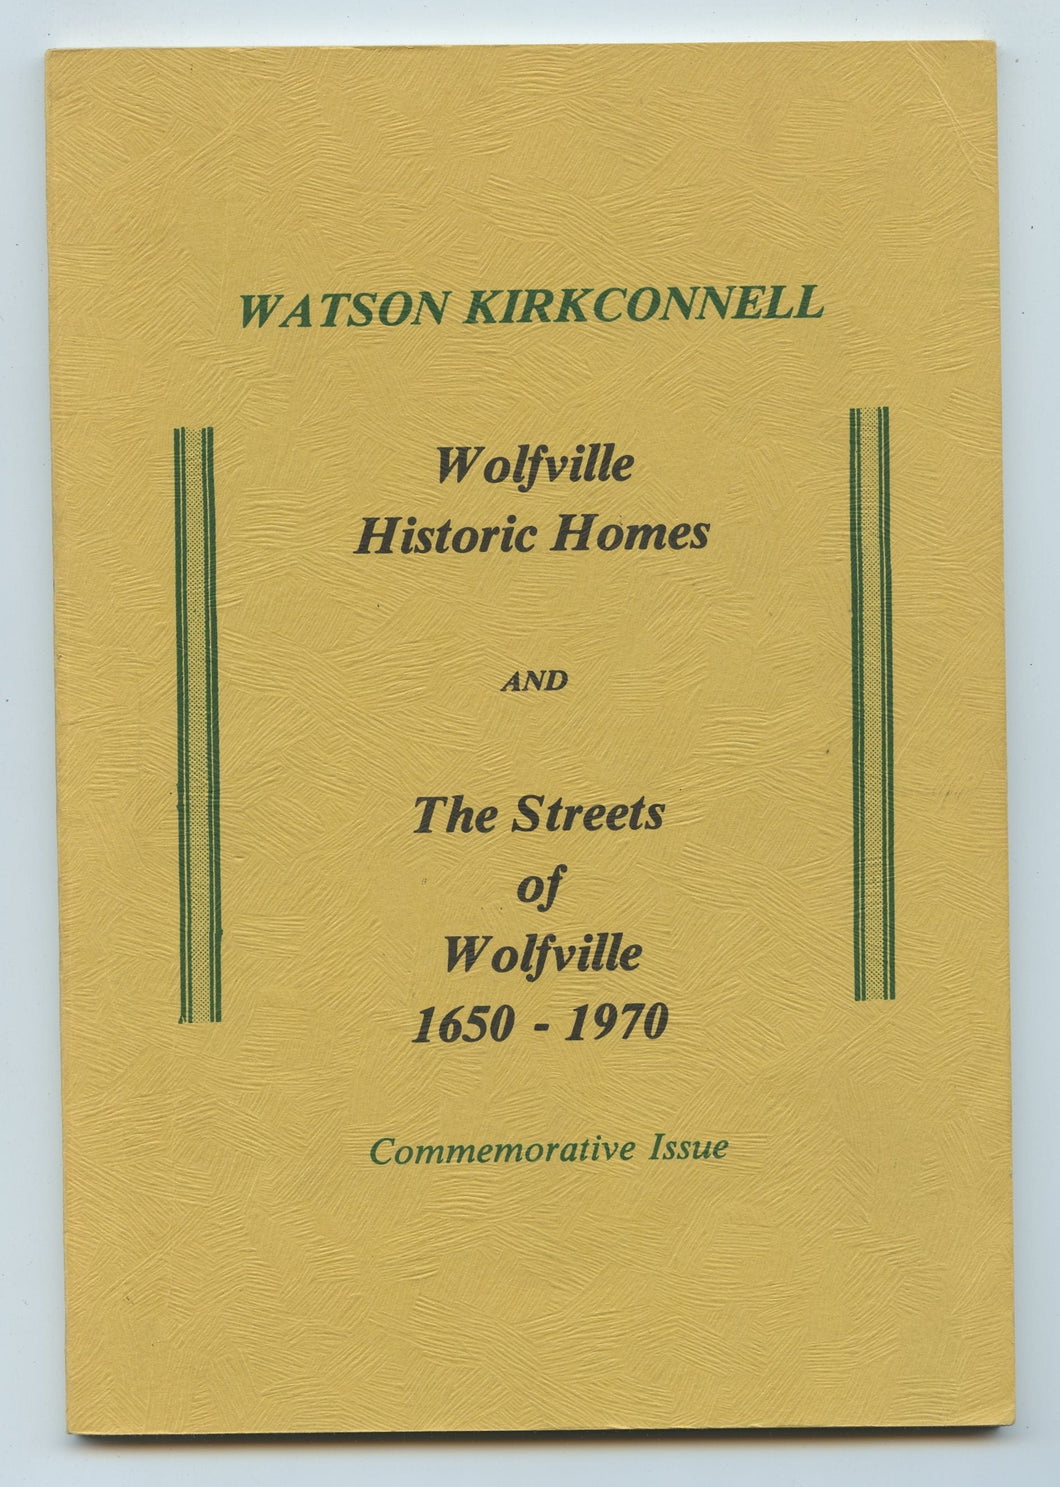 Wolfville Historic Homes and The Streets of Wolfville 1650-1970